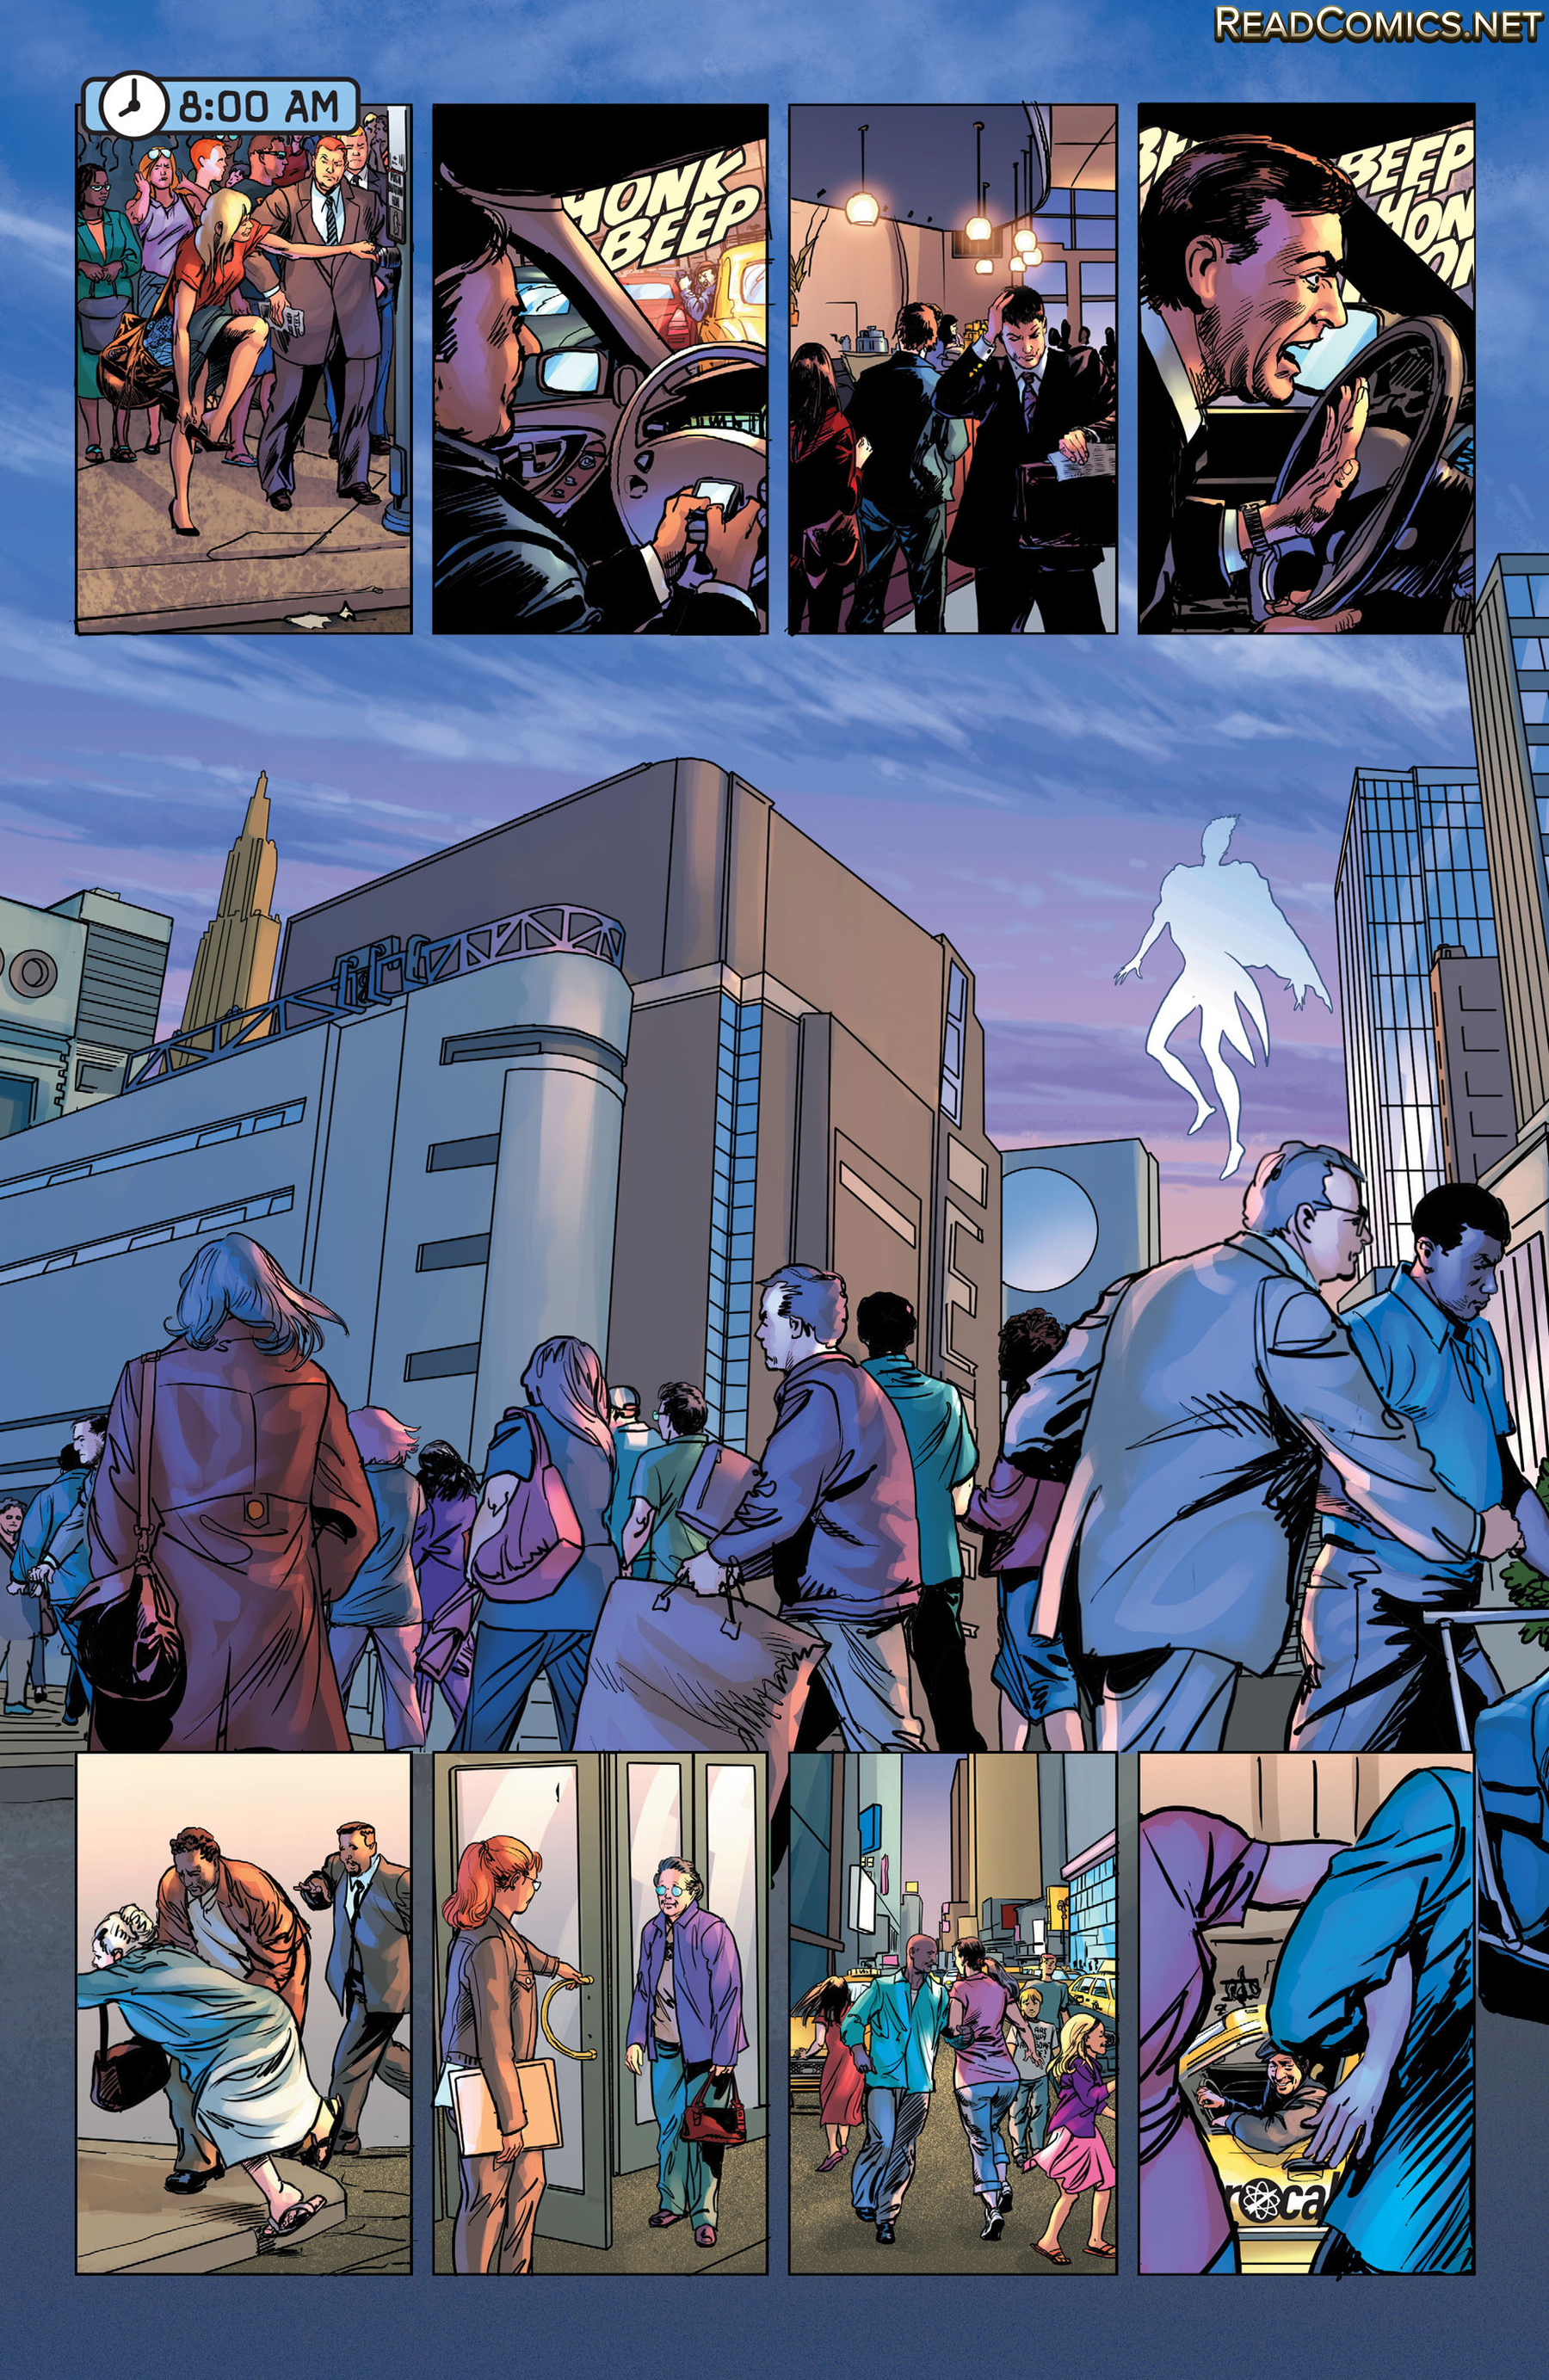 Astro City (2013-): Chapter 13 - Page 2